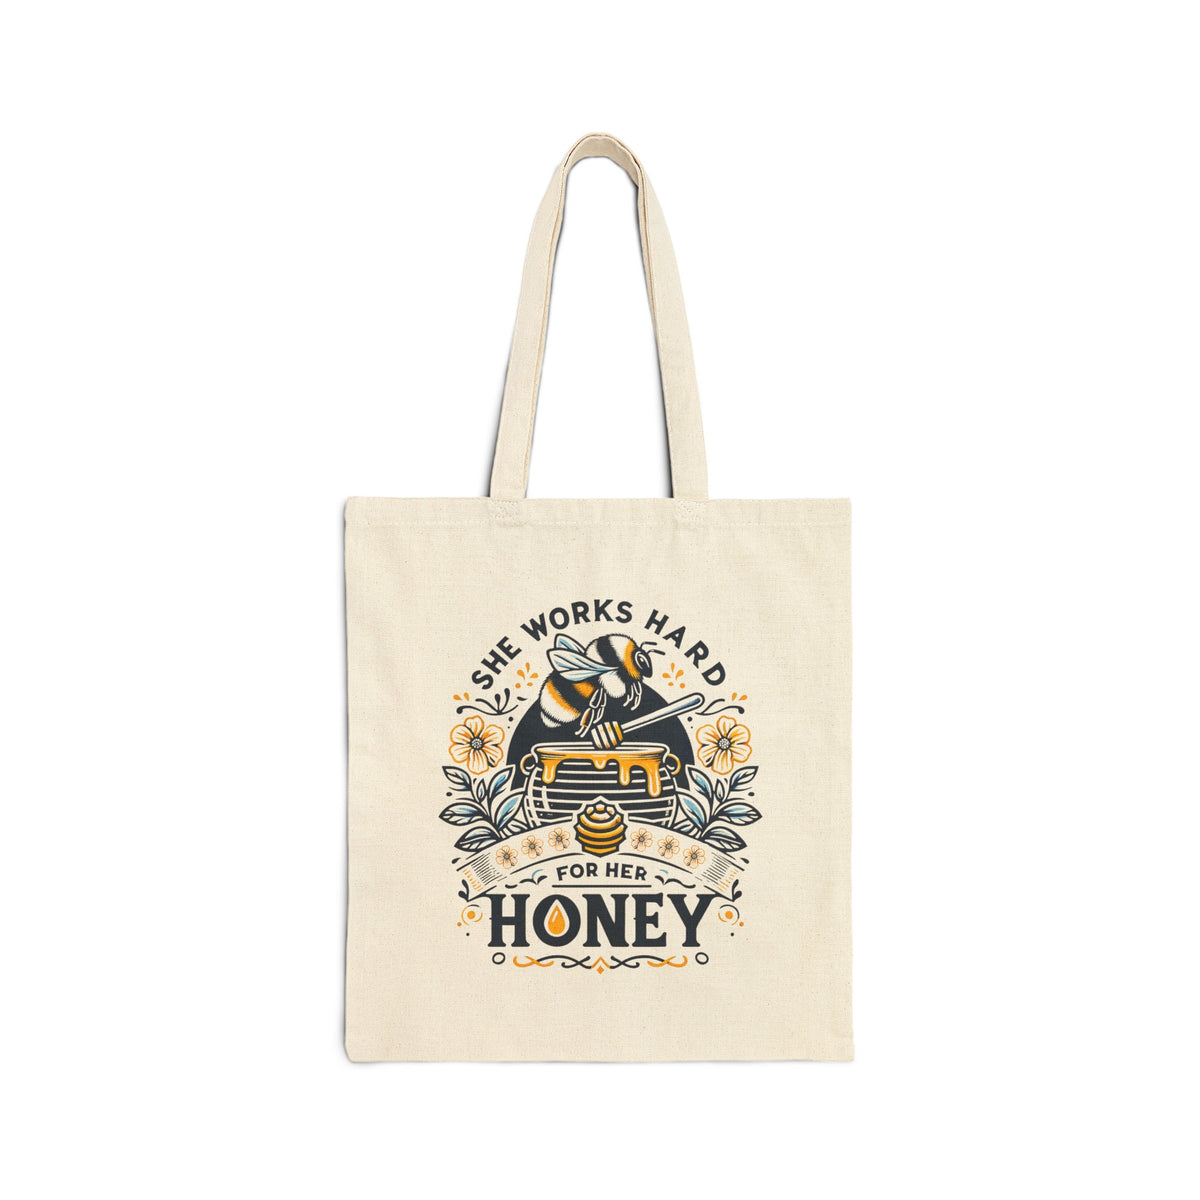 She Works Hard Honey Tote Bag | Honey Bee Gift | Cute Bee Lover Book Bag | Cotton Canvas Tote Bag